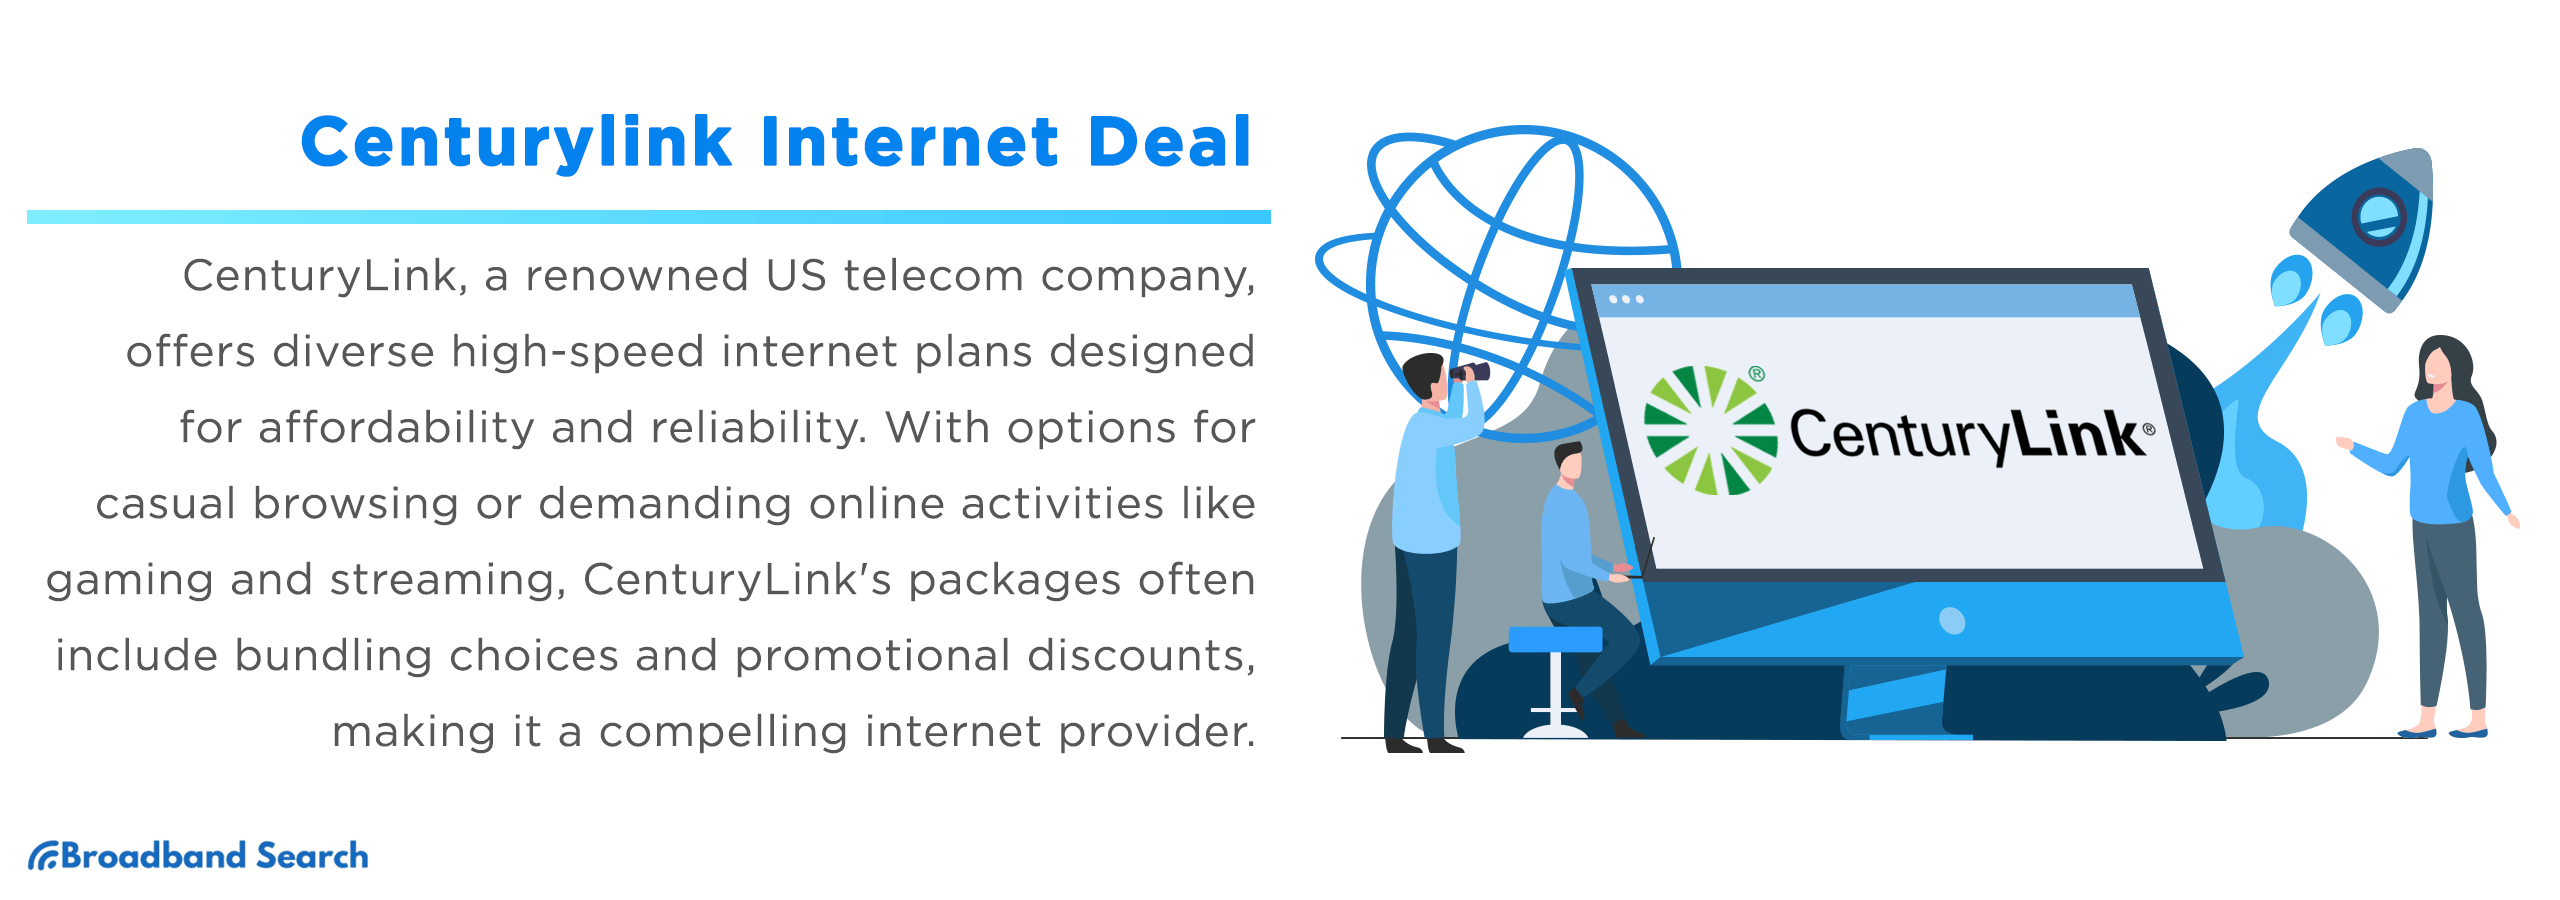 Get More for Less with Centurylink Internet Deals